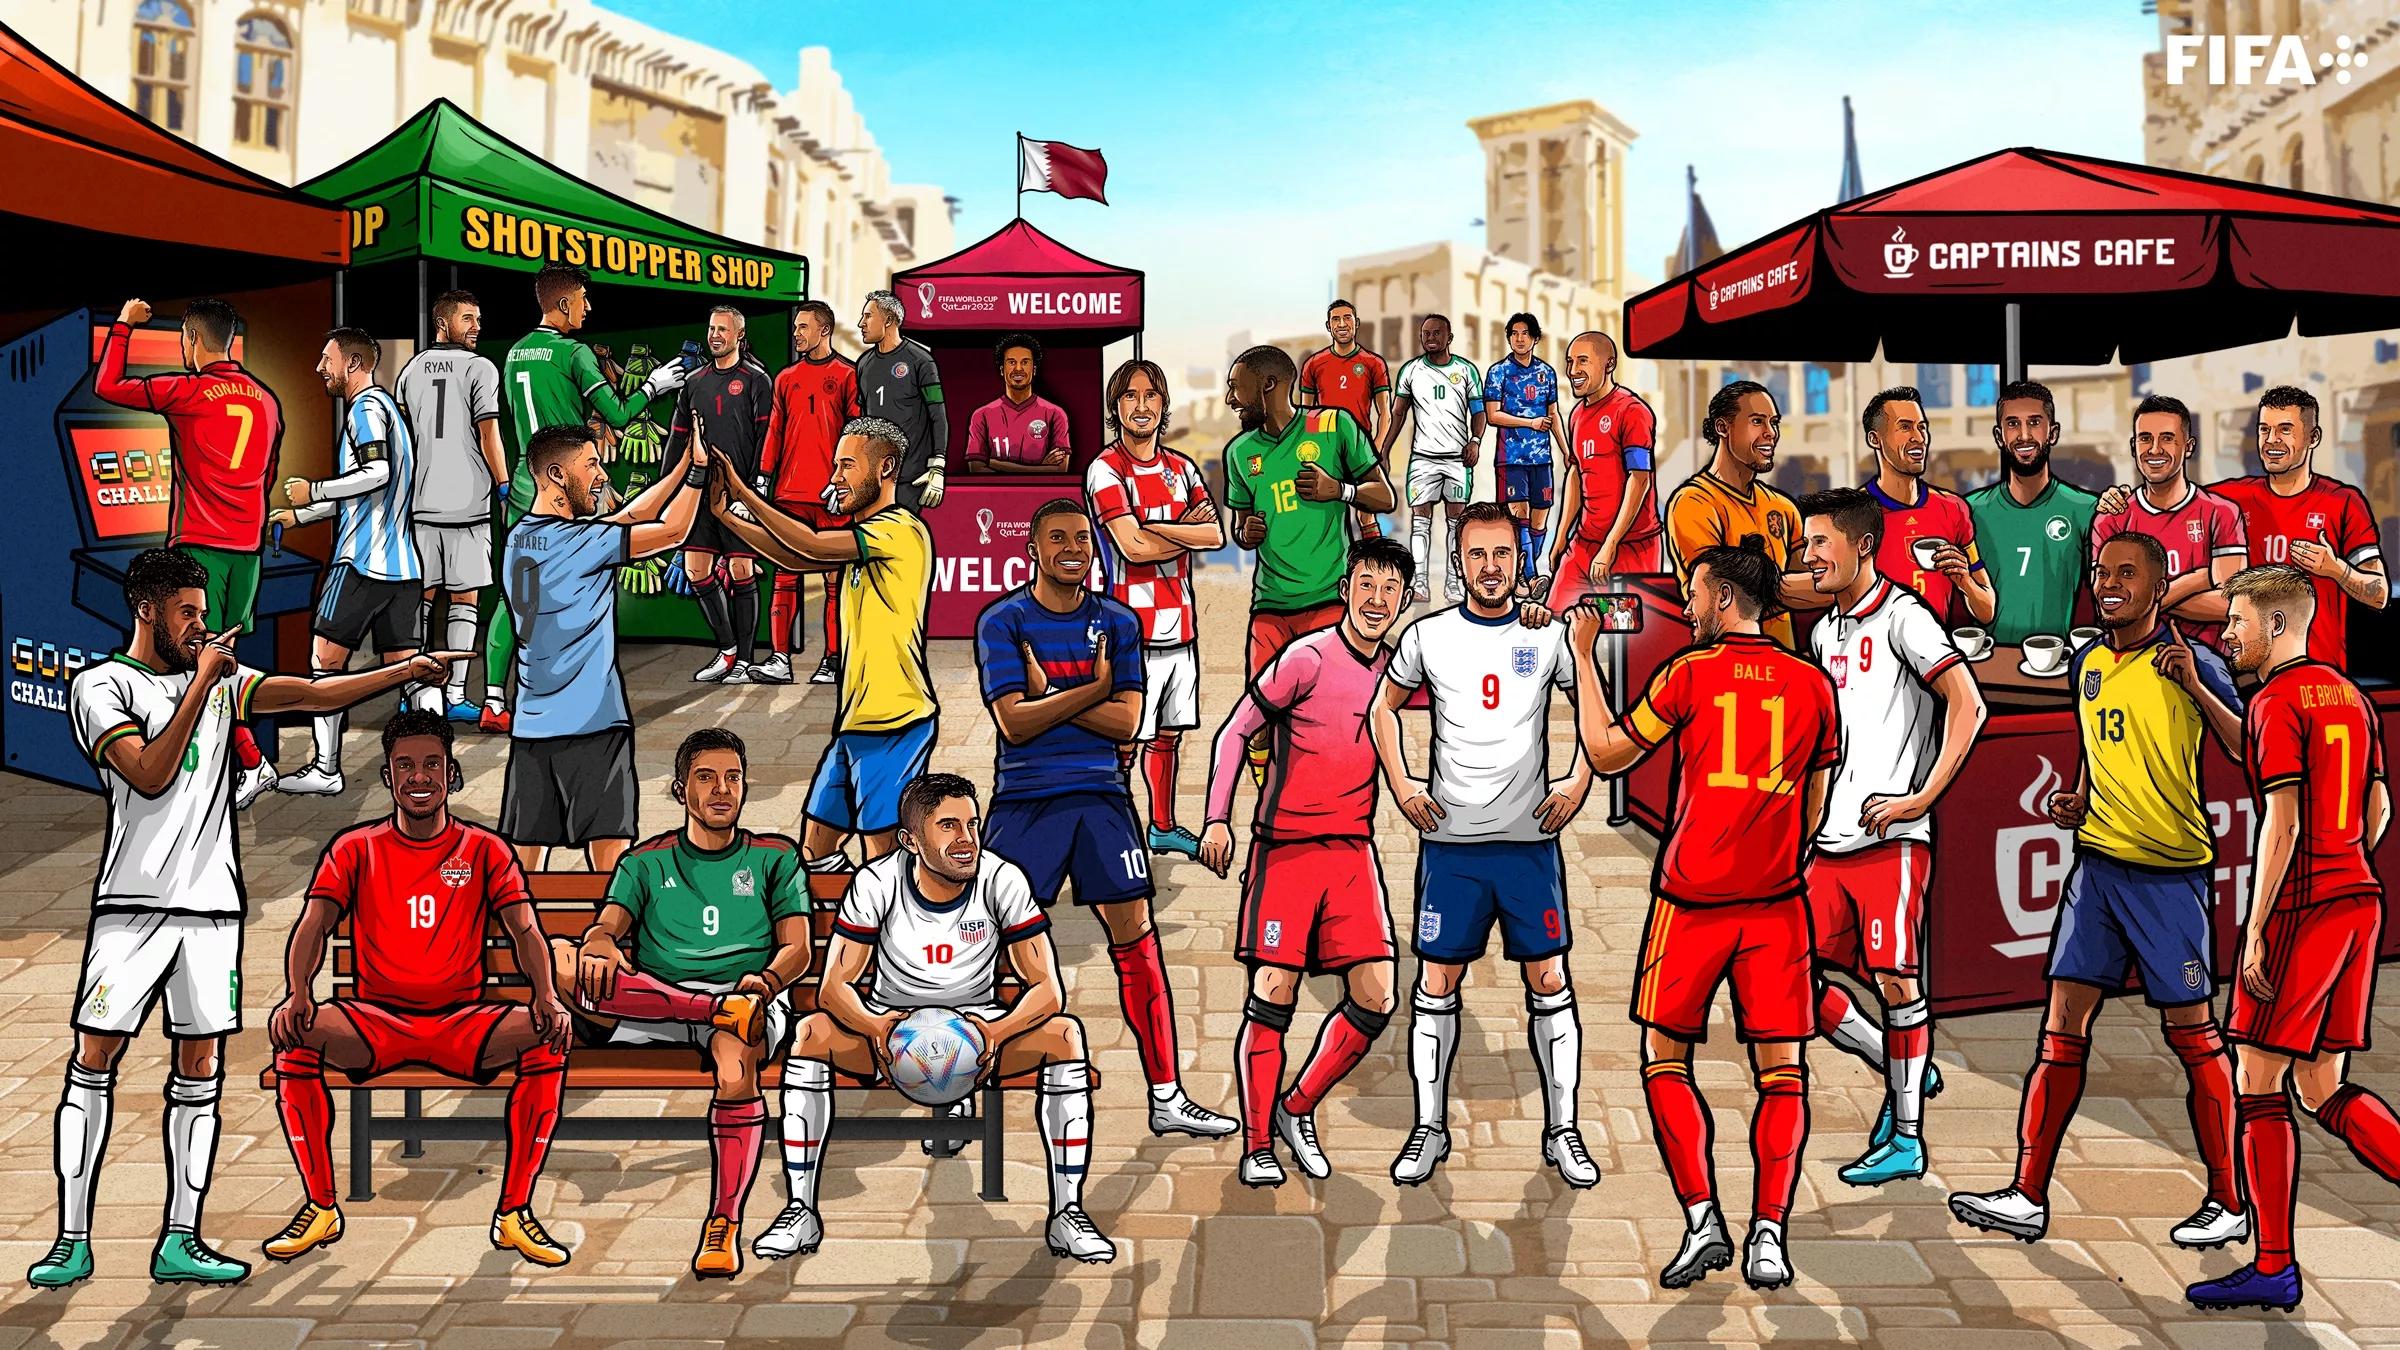 Qatar 2022: Groups, fixtures, stadiums, squads, tickets and more